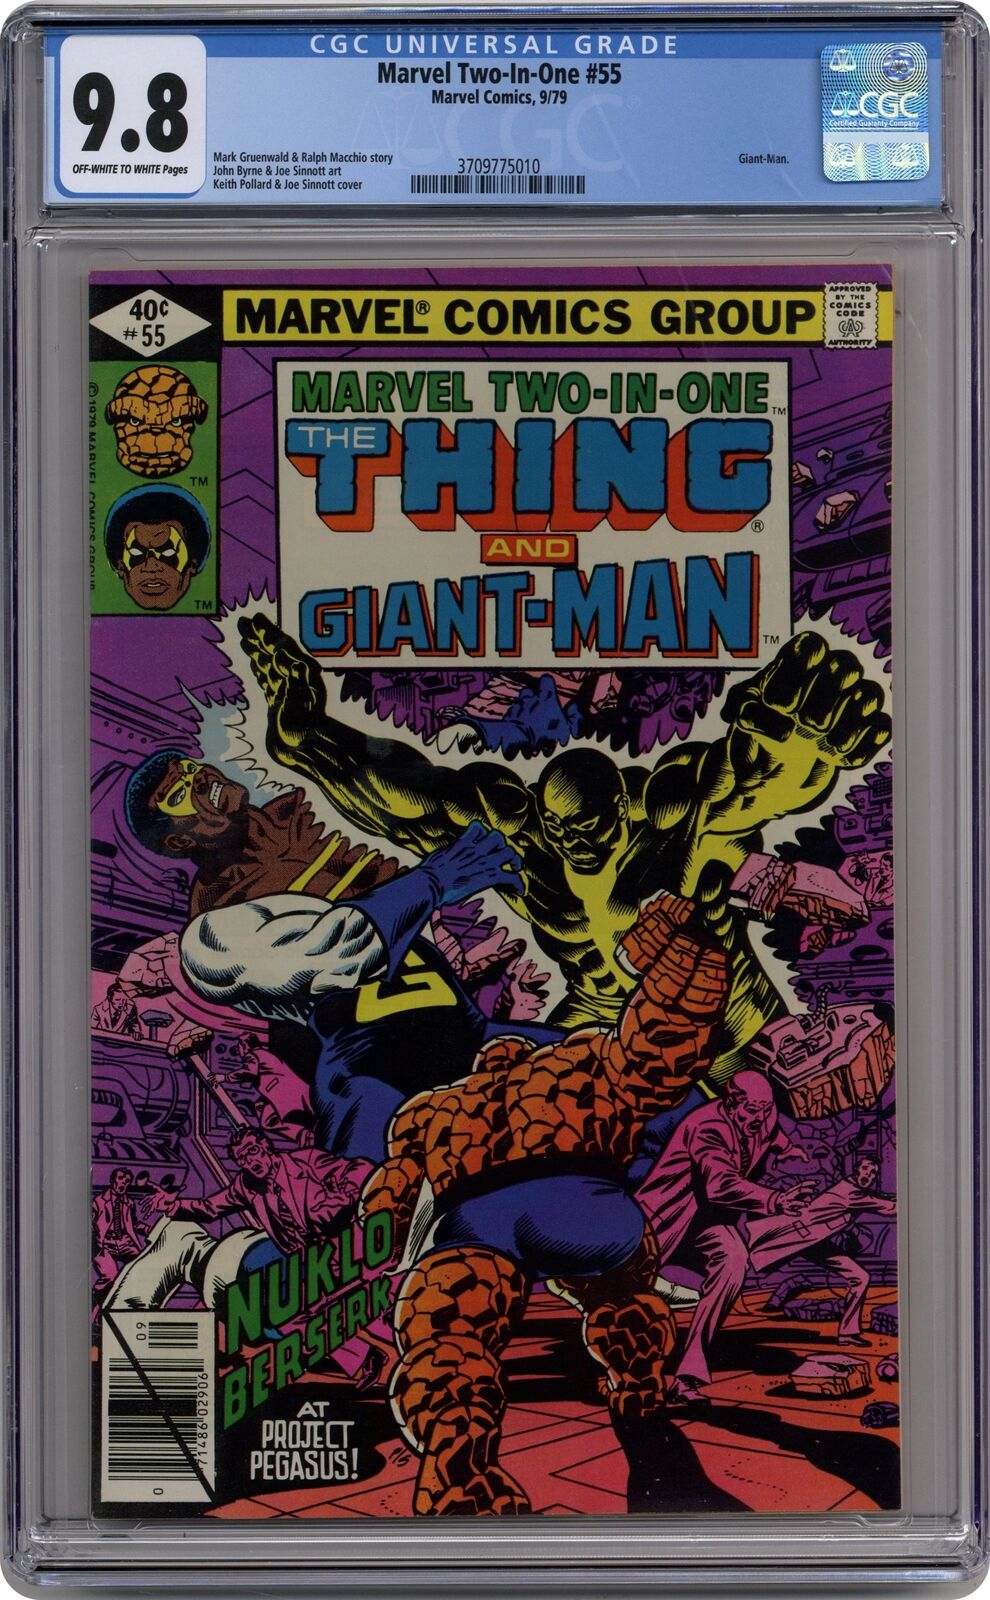 Marvel Two-in-One #55 CGC 9.8 1979 3709775010